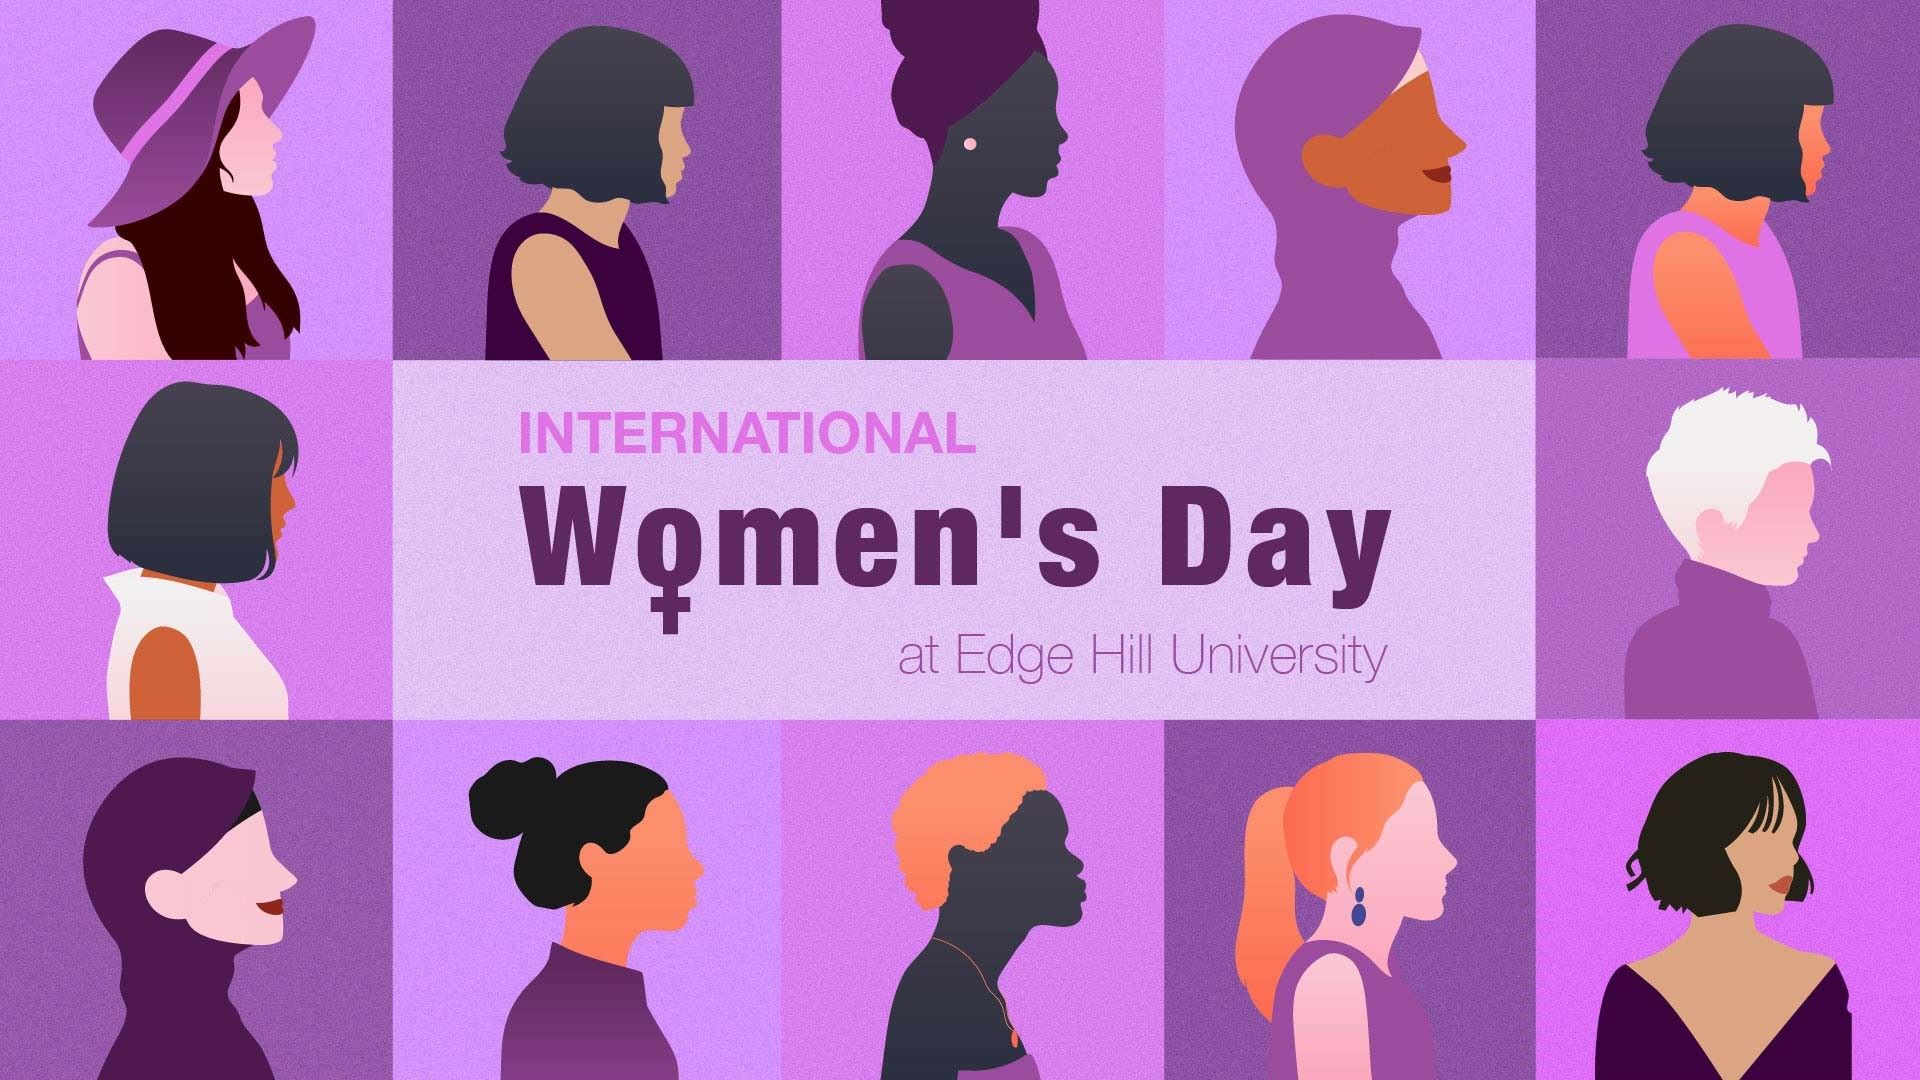 Illustrations of women put together in a grid format with a purple background and International Women's Day at Edge Hill University in writing.